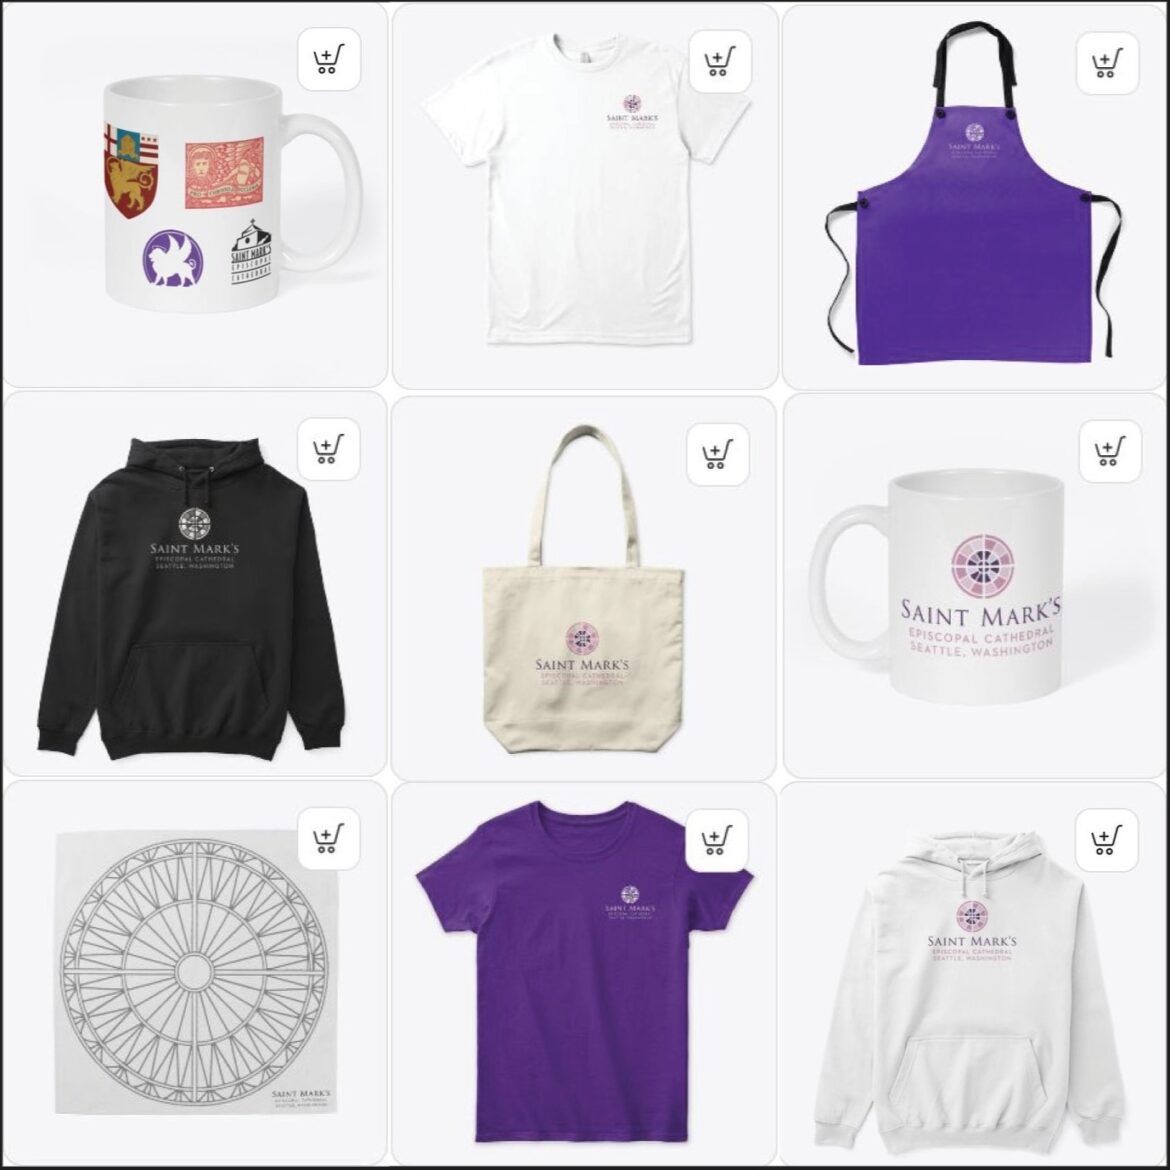 The Saint Mark’s Cathedral Merch Store!